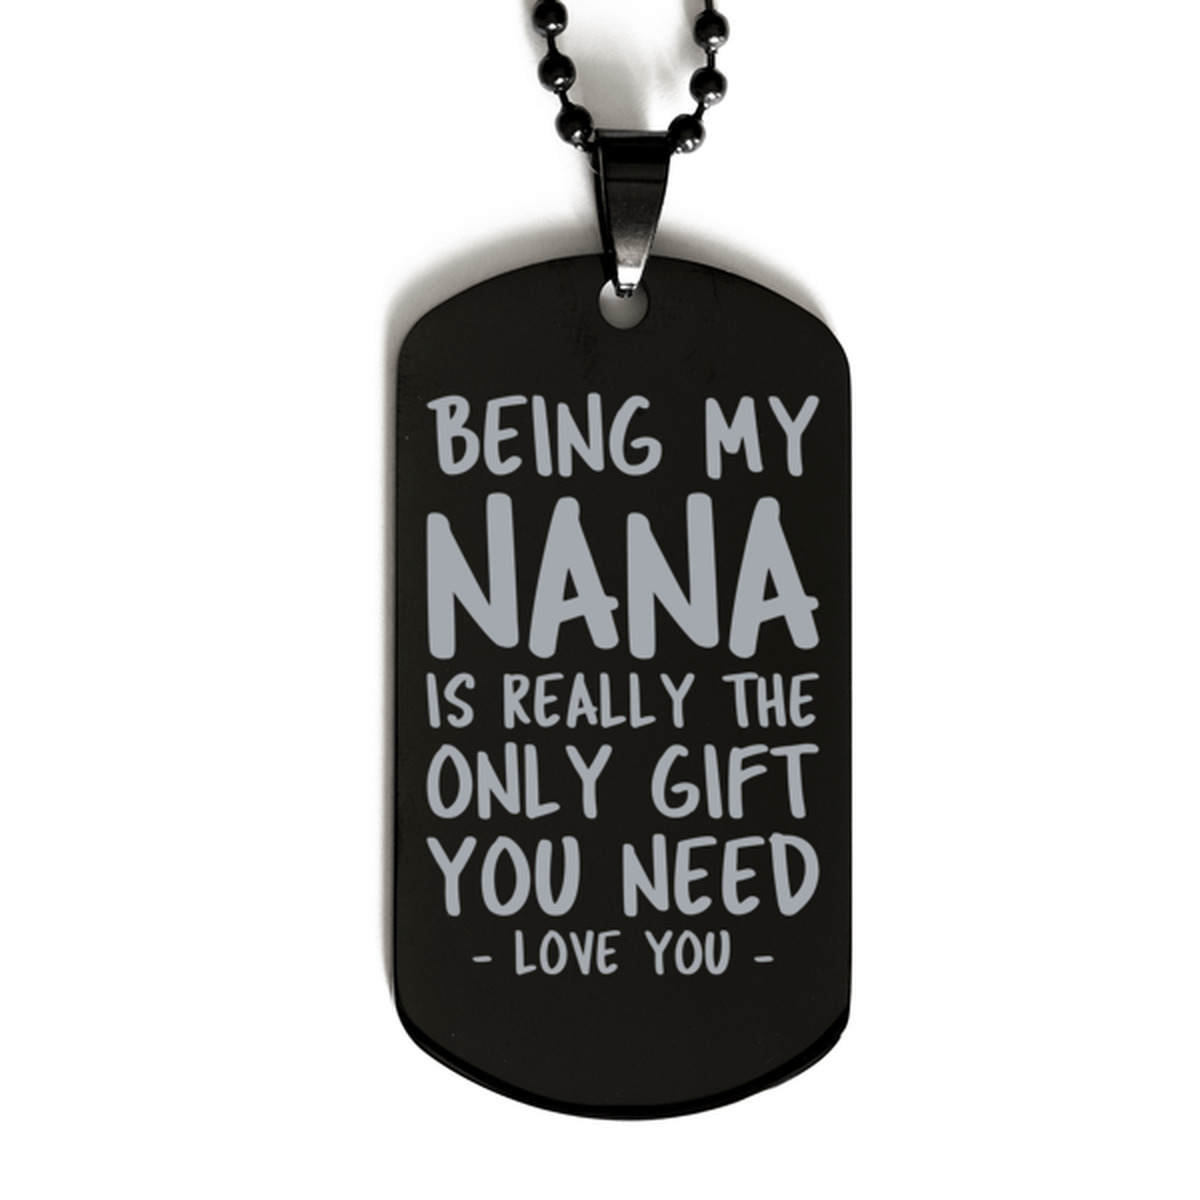 Funny Nana Black Dog Tag Necklace, Being My Nana Is Really the Only Gift You Need, Best Birthday Gifts for Nana